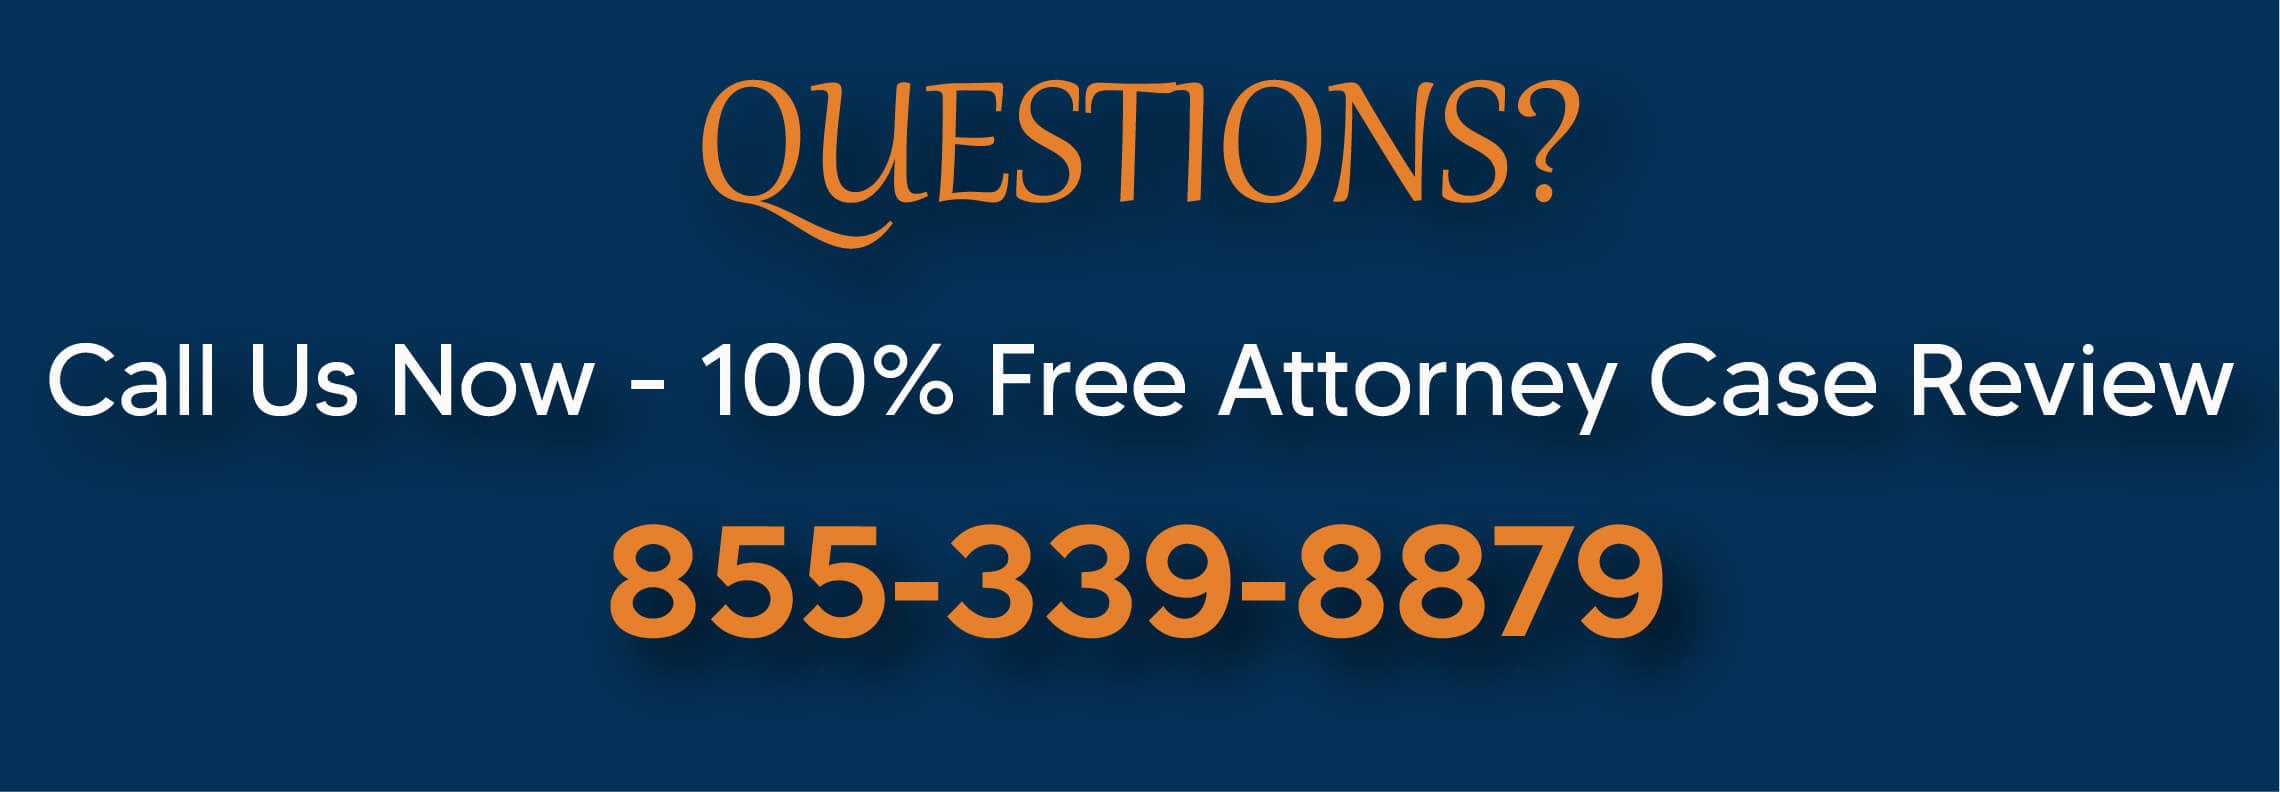 questions medical malpractice ectopic pregnancy lawyer